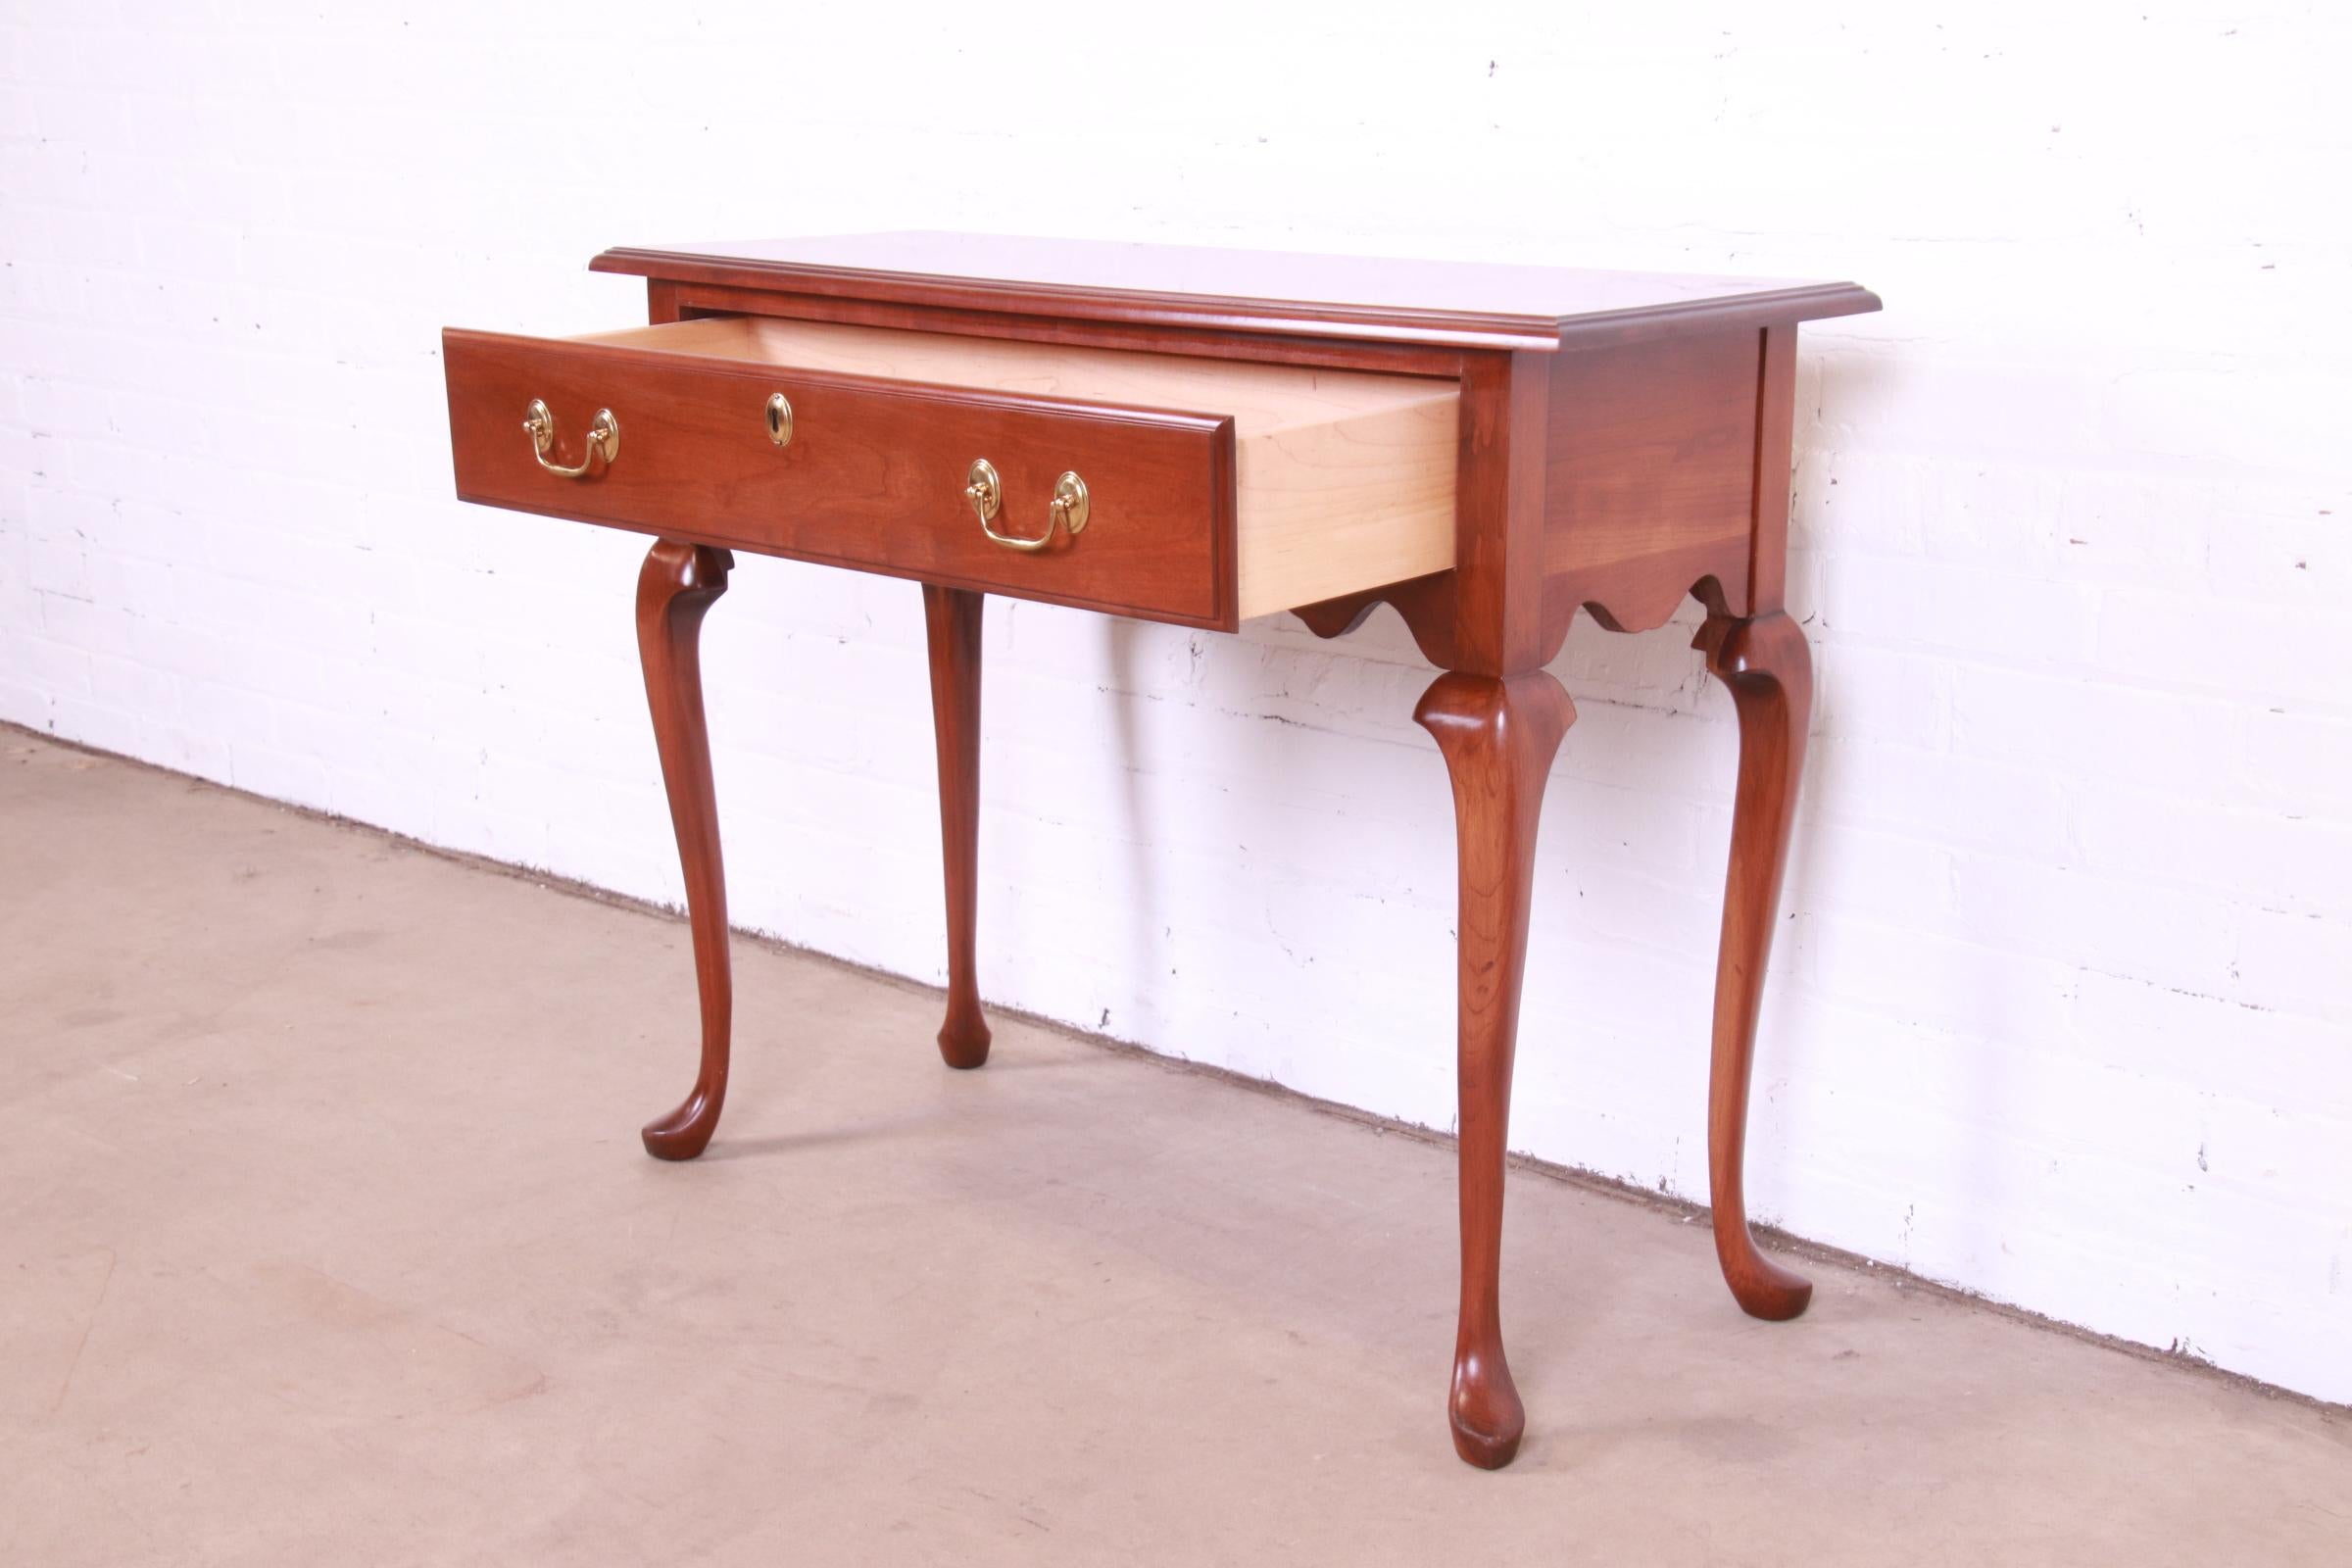 20th Century Harden Furniture Queen Anne Solid Cherry Wood Console or Sofa Table For Sale